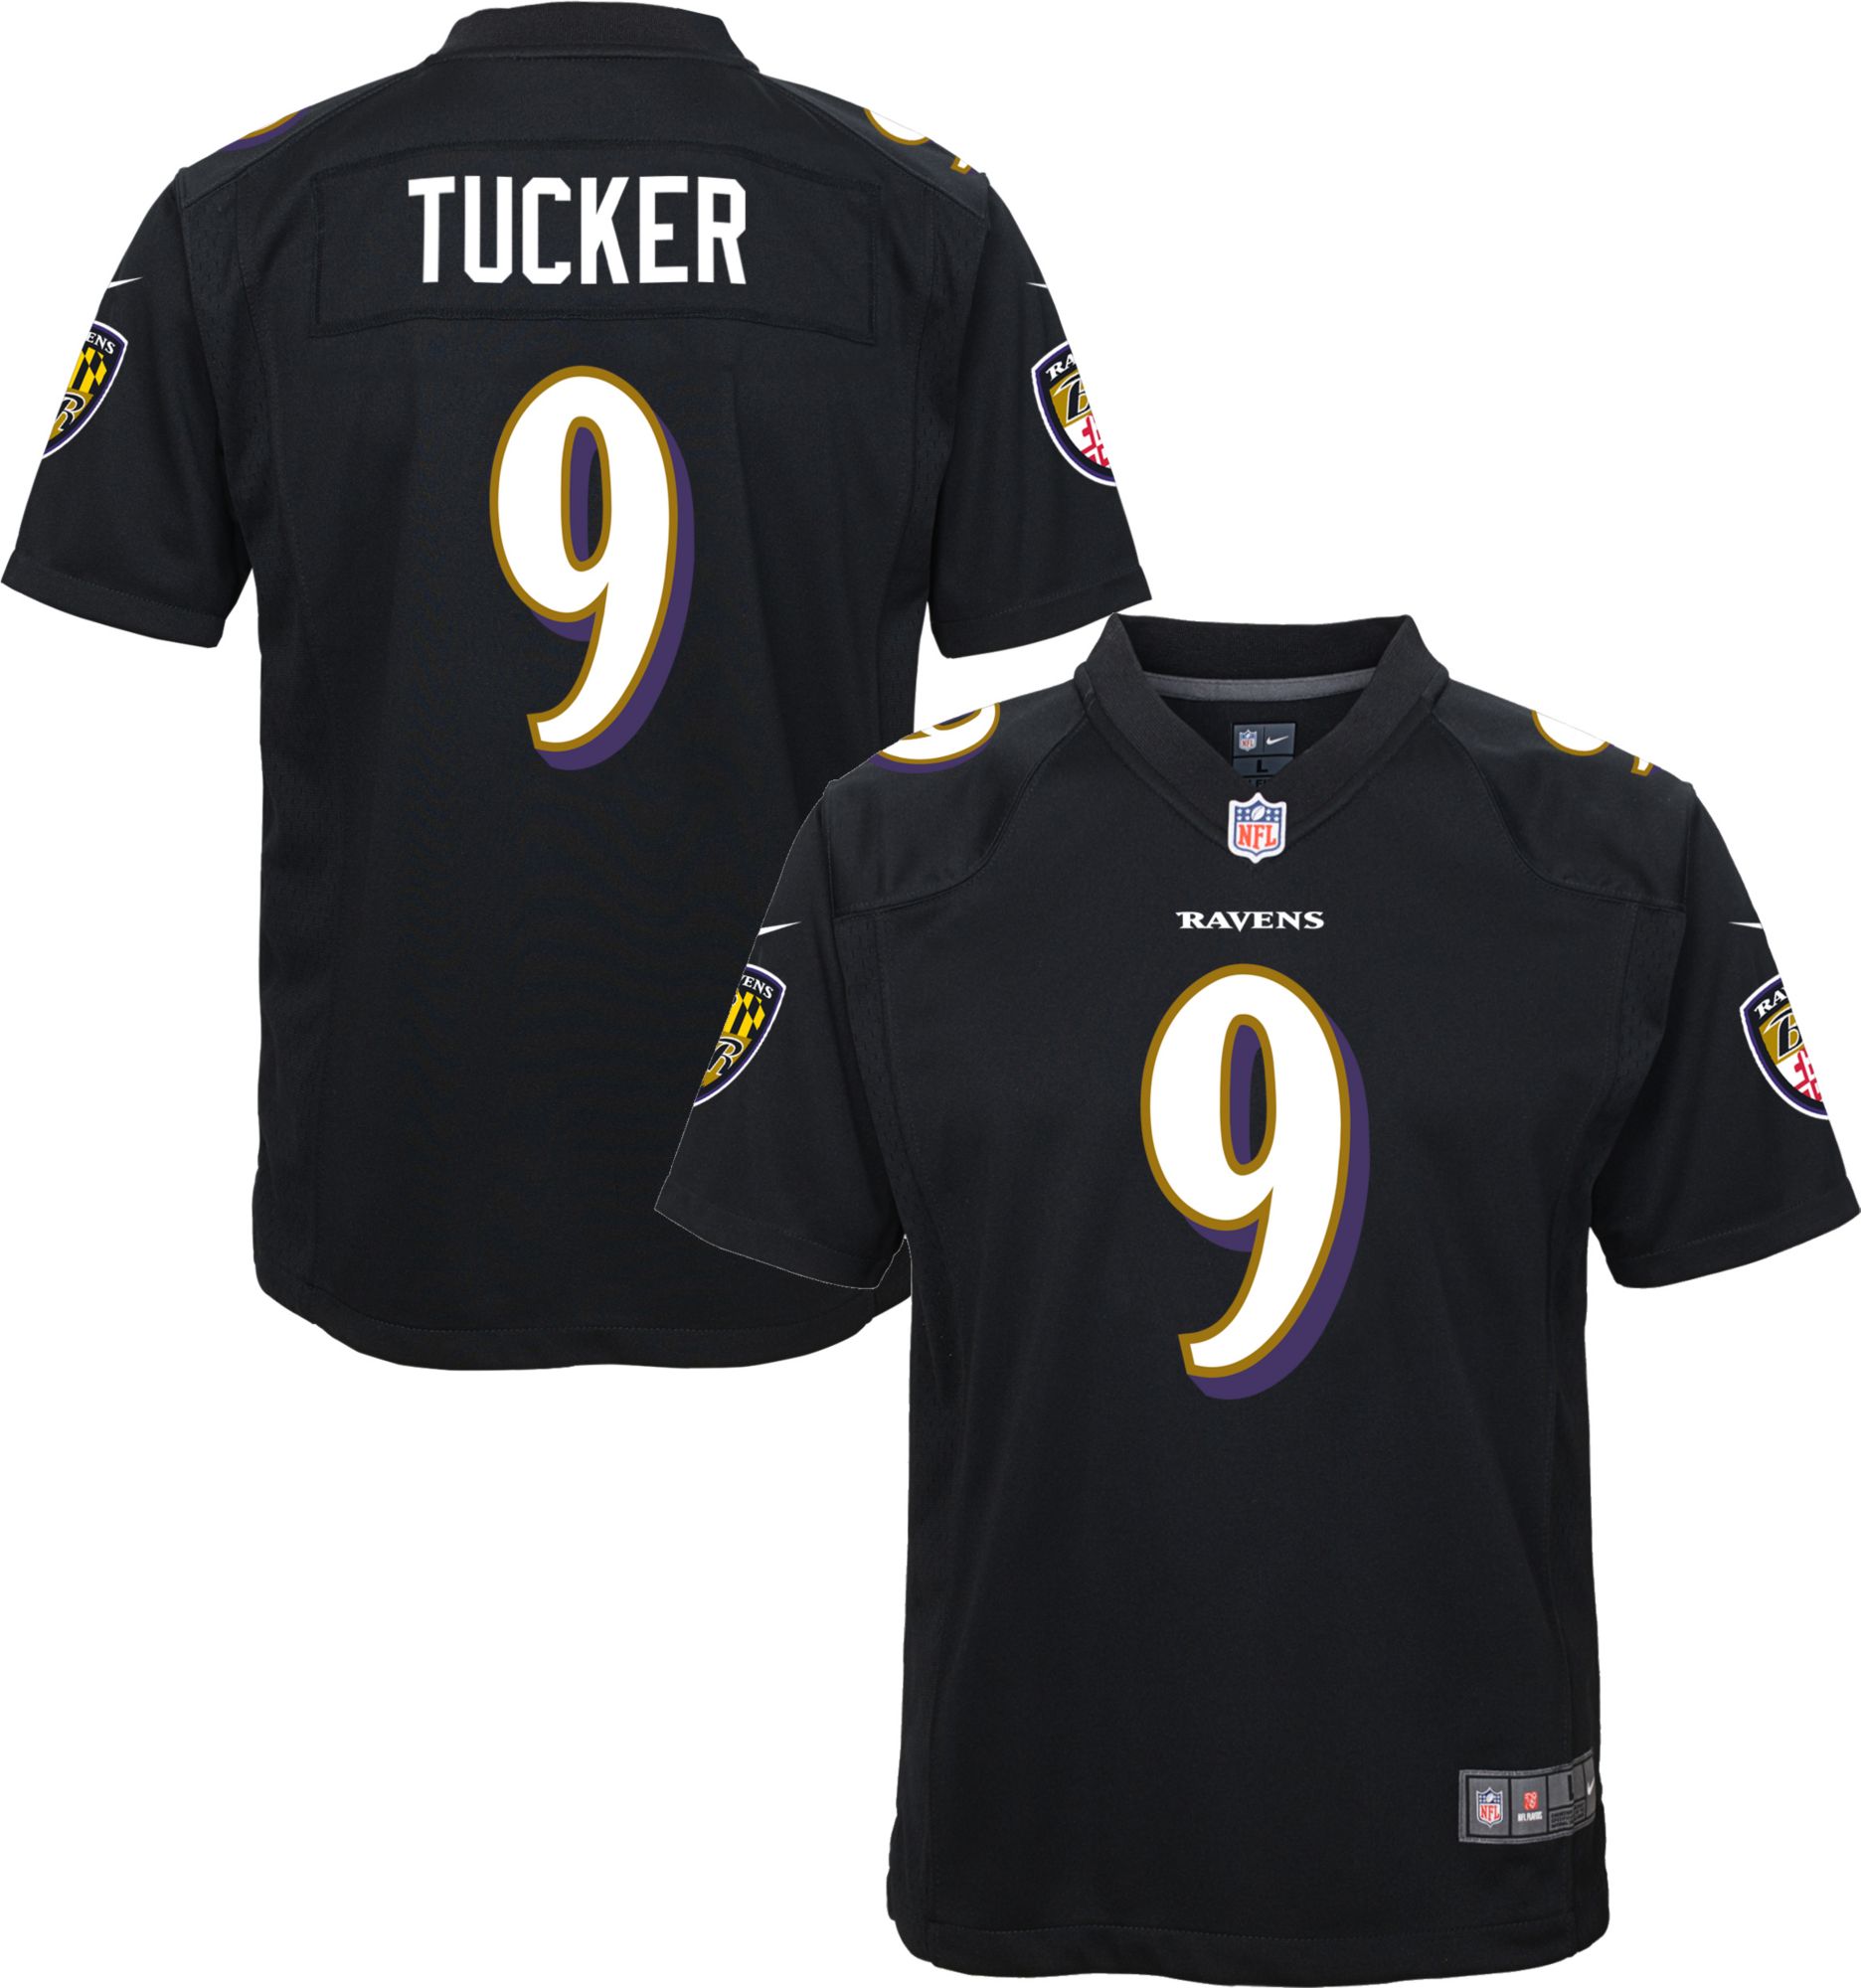 baltimore ravens clearance